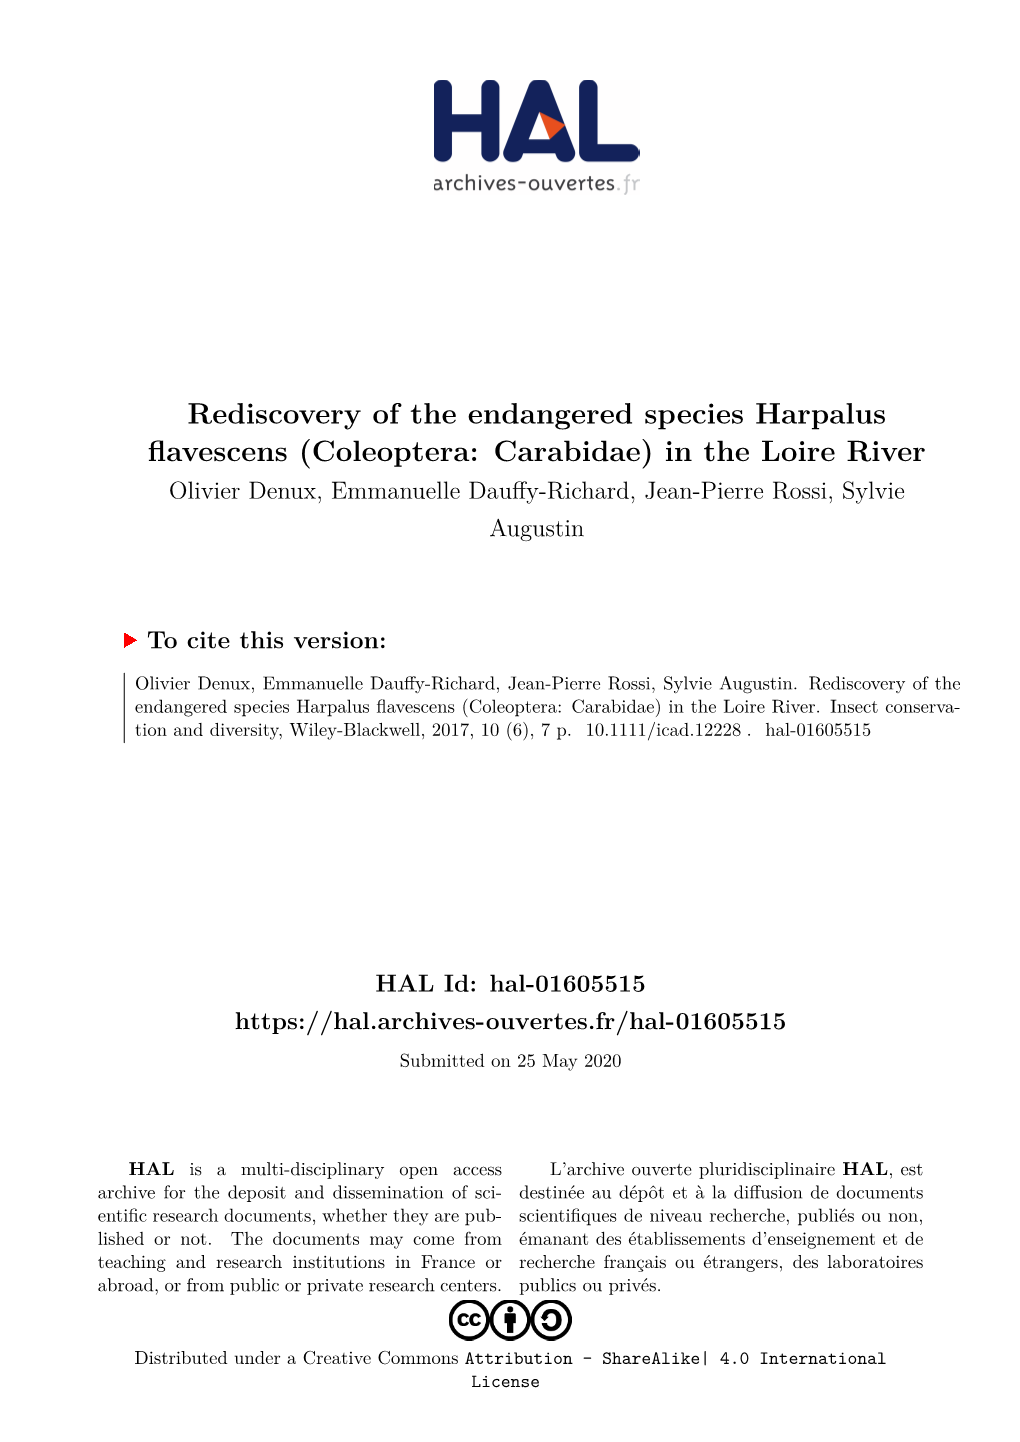 Rediscovery of the Endangered Species Harpalus Flavescens